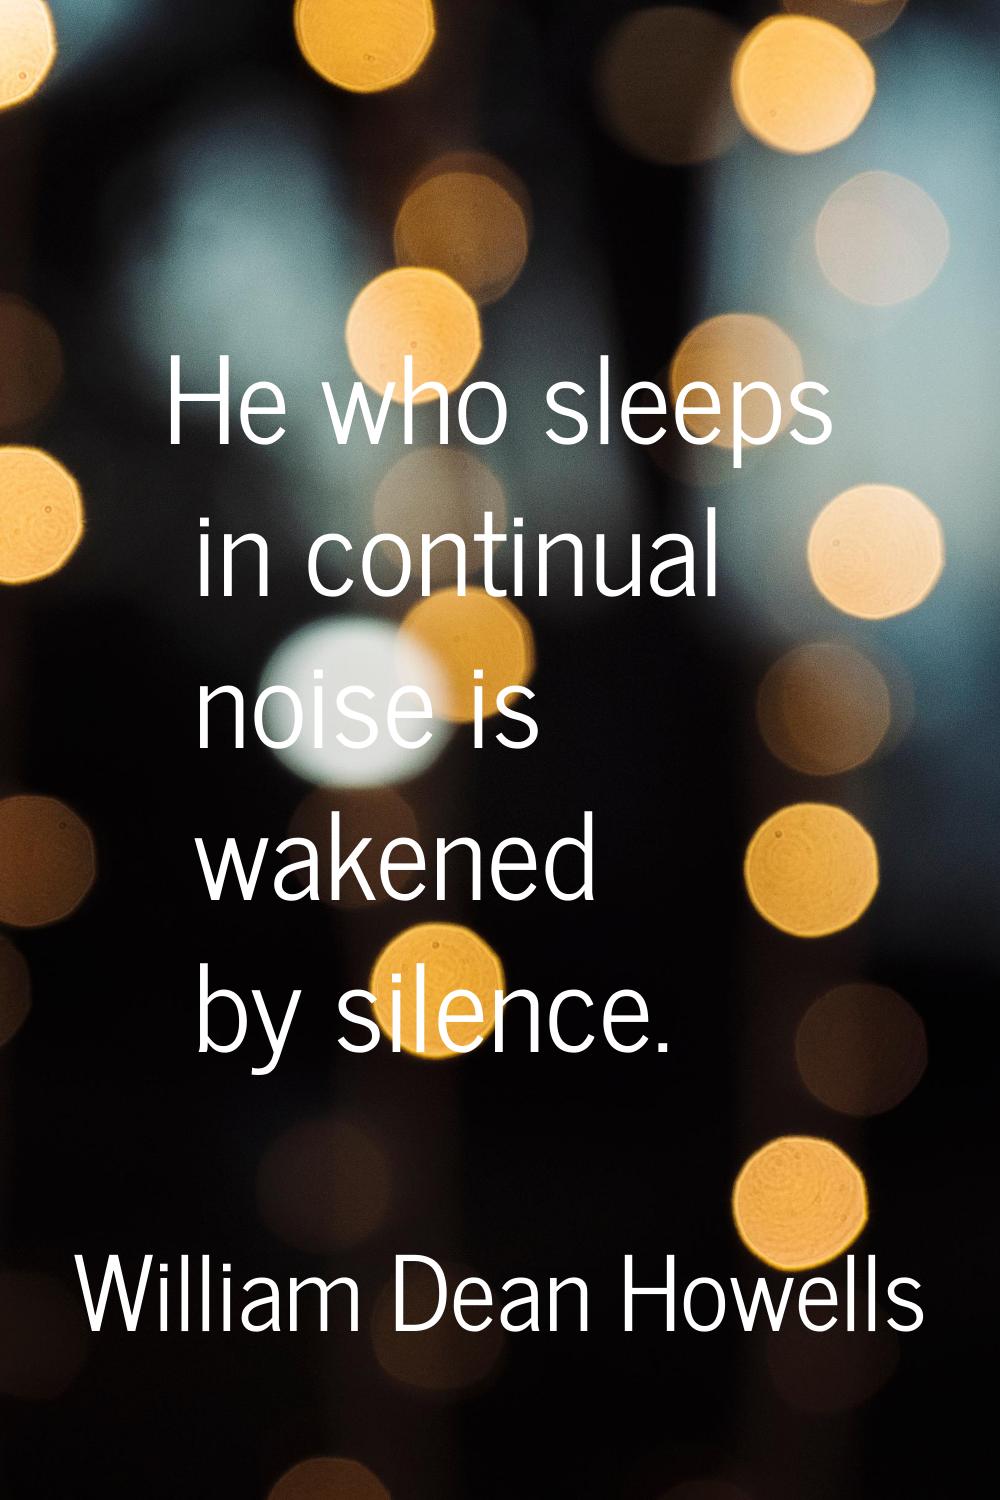 He who sleeps in continual noise is wakened by silence.